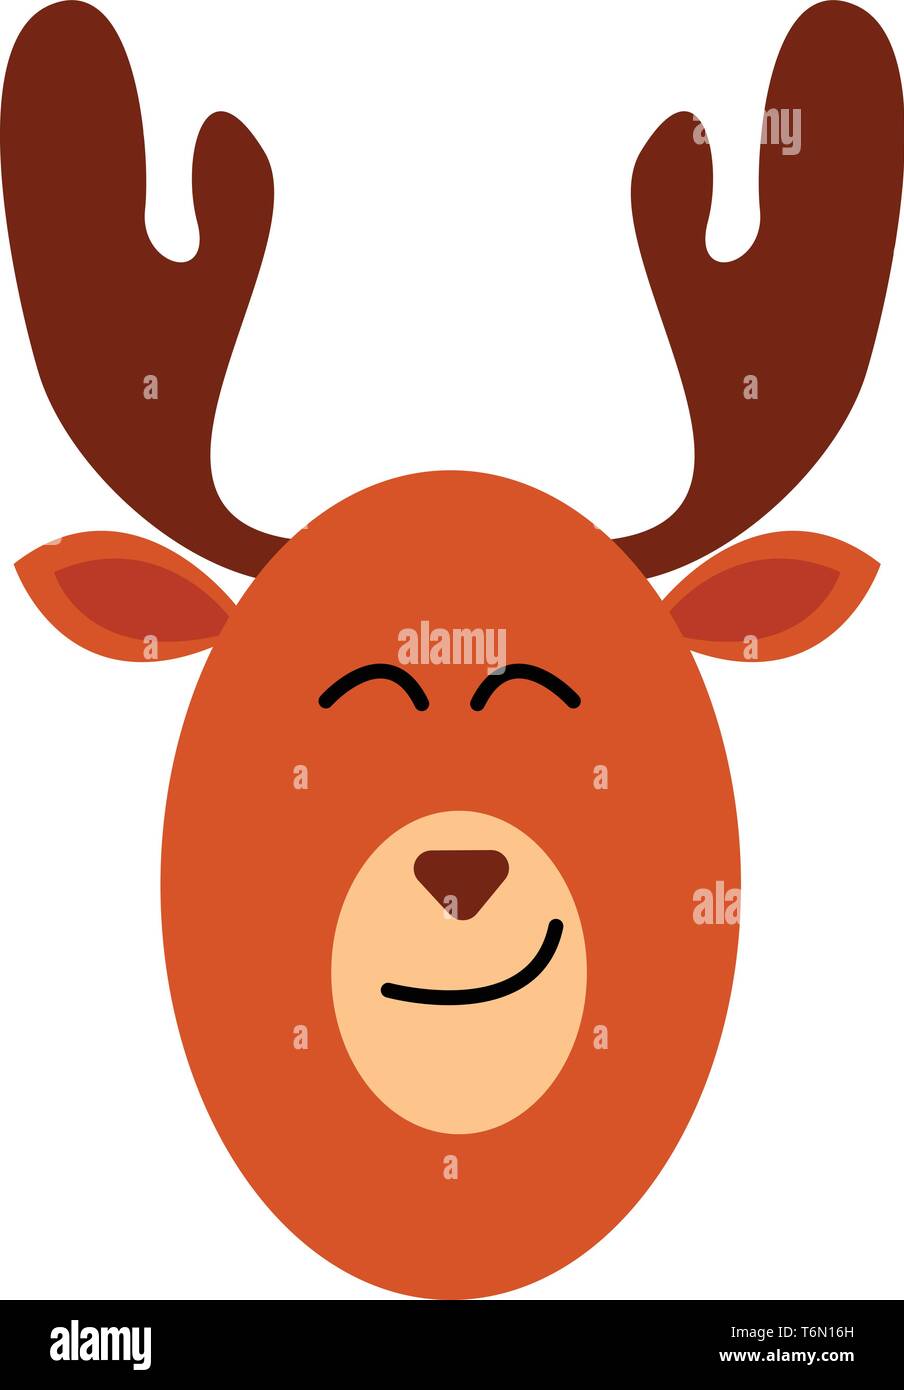 Emoji of a moose in brown color with palmate antlers  round-shaped face  inverted triangle-like nose  oval-shaped ears with eyes closed is smiling  ve Stock Vector